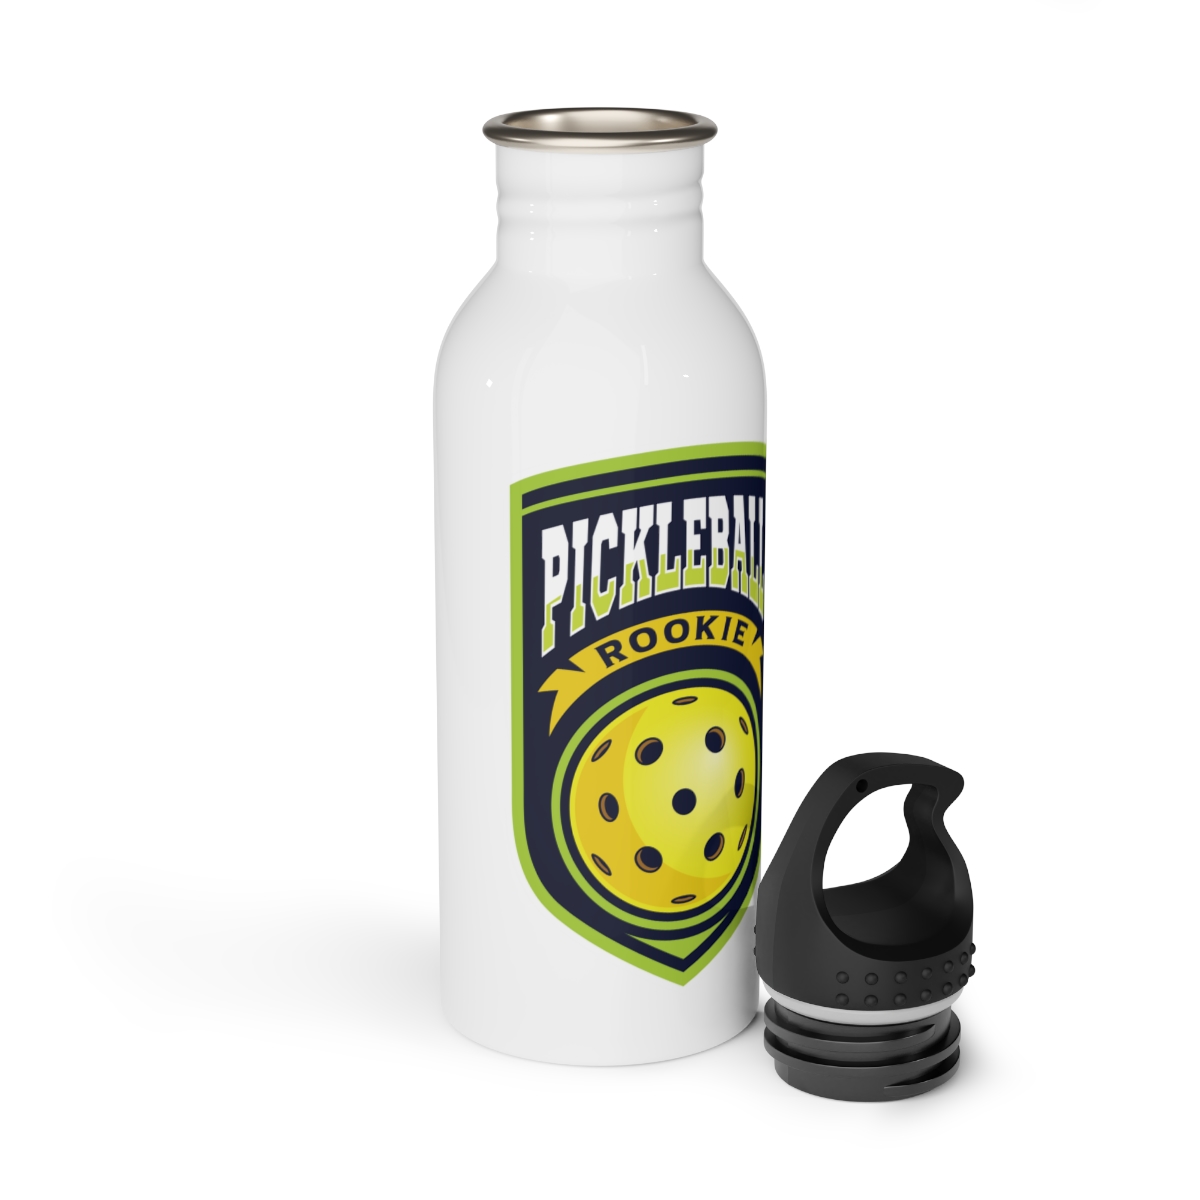 Pickleball Rookie - Crest Stainless Steel Water Bottle product thumbnail image